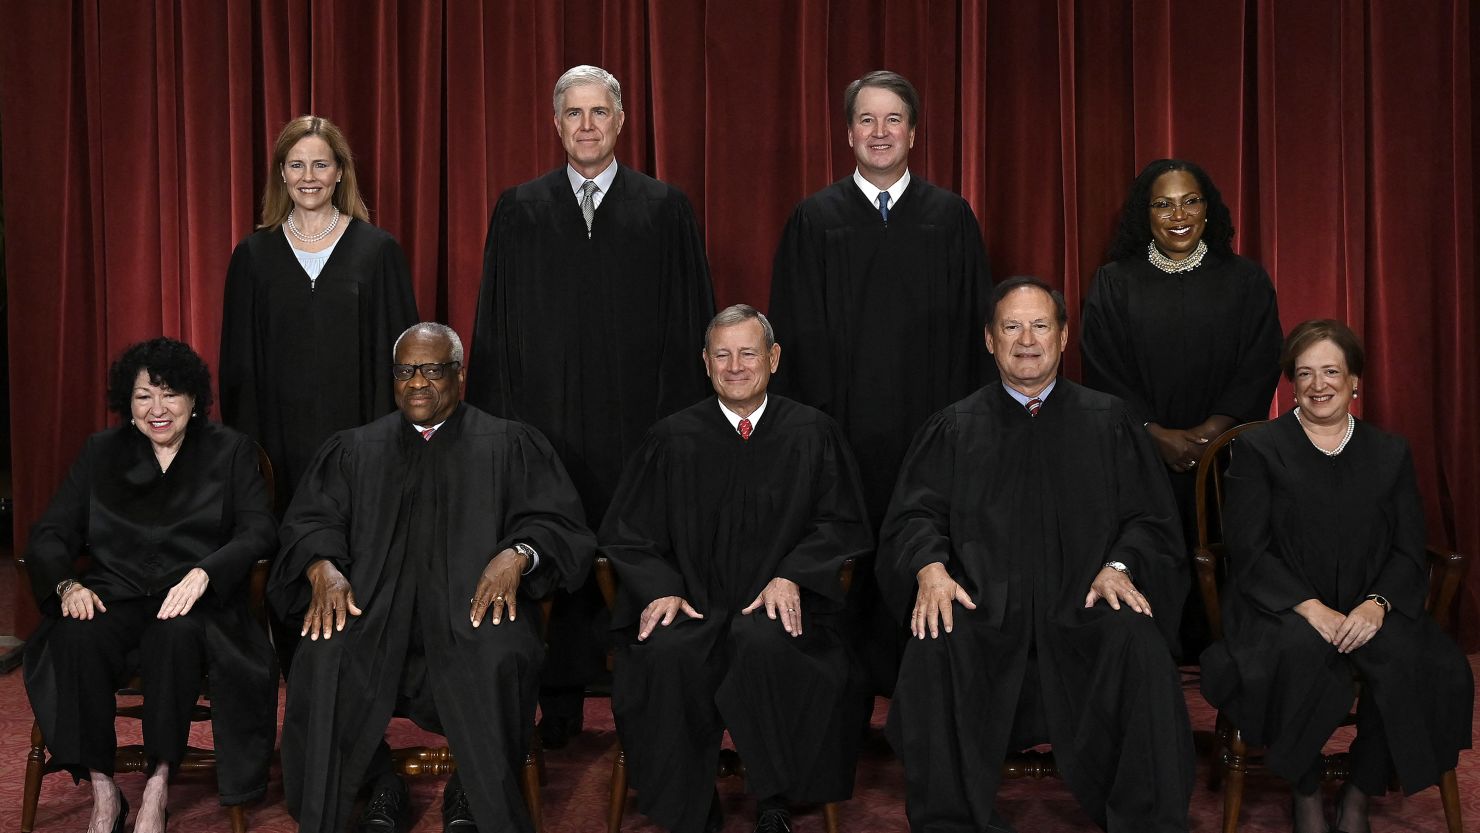 Justices of the US Supreme Court pose for their official photo at the Supreme Court in Washington, DC on October 7, 2022.